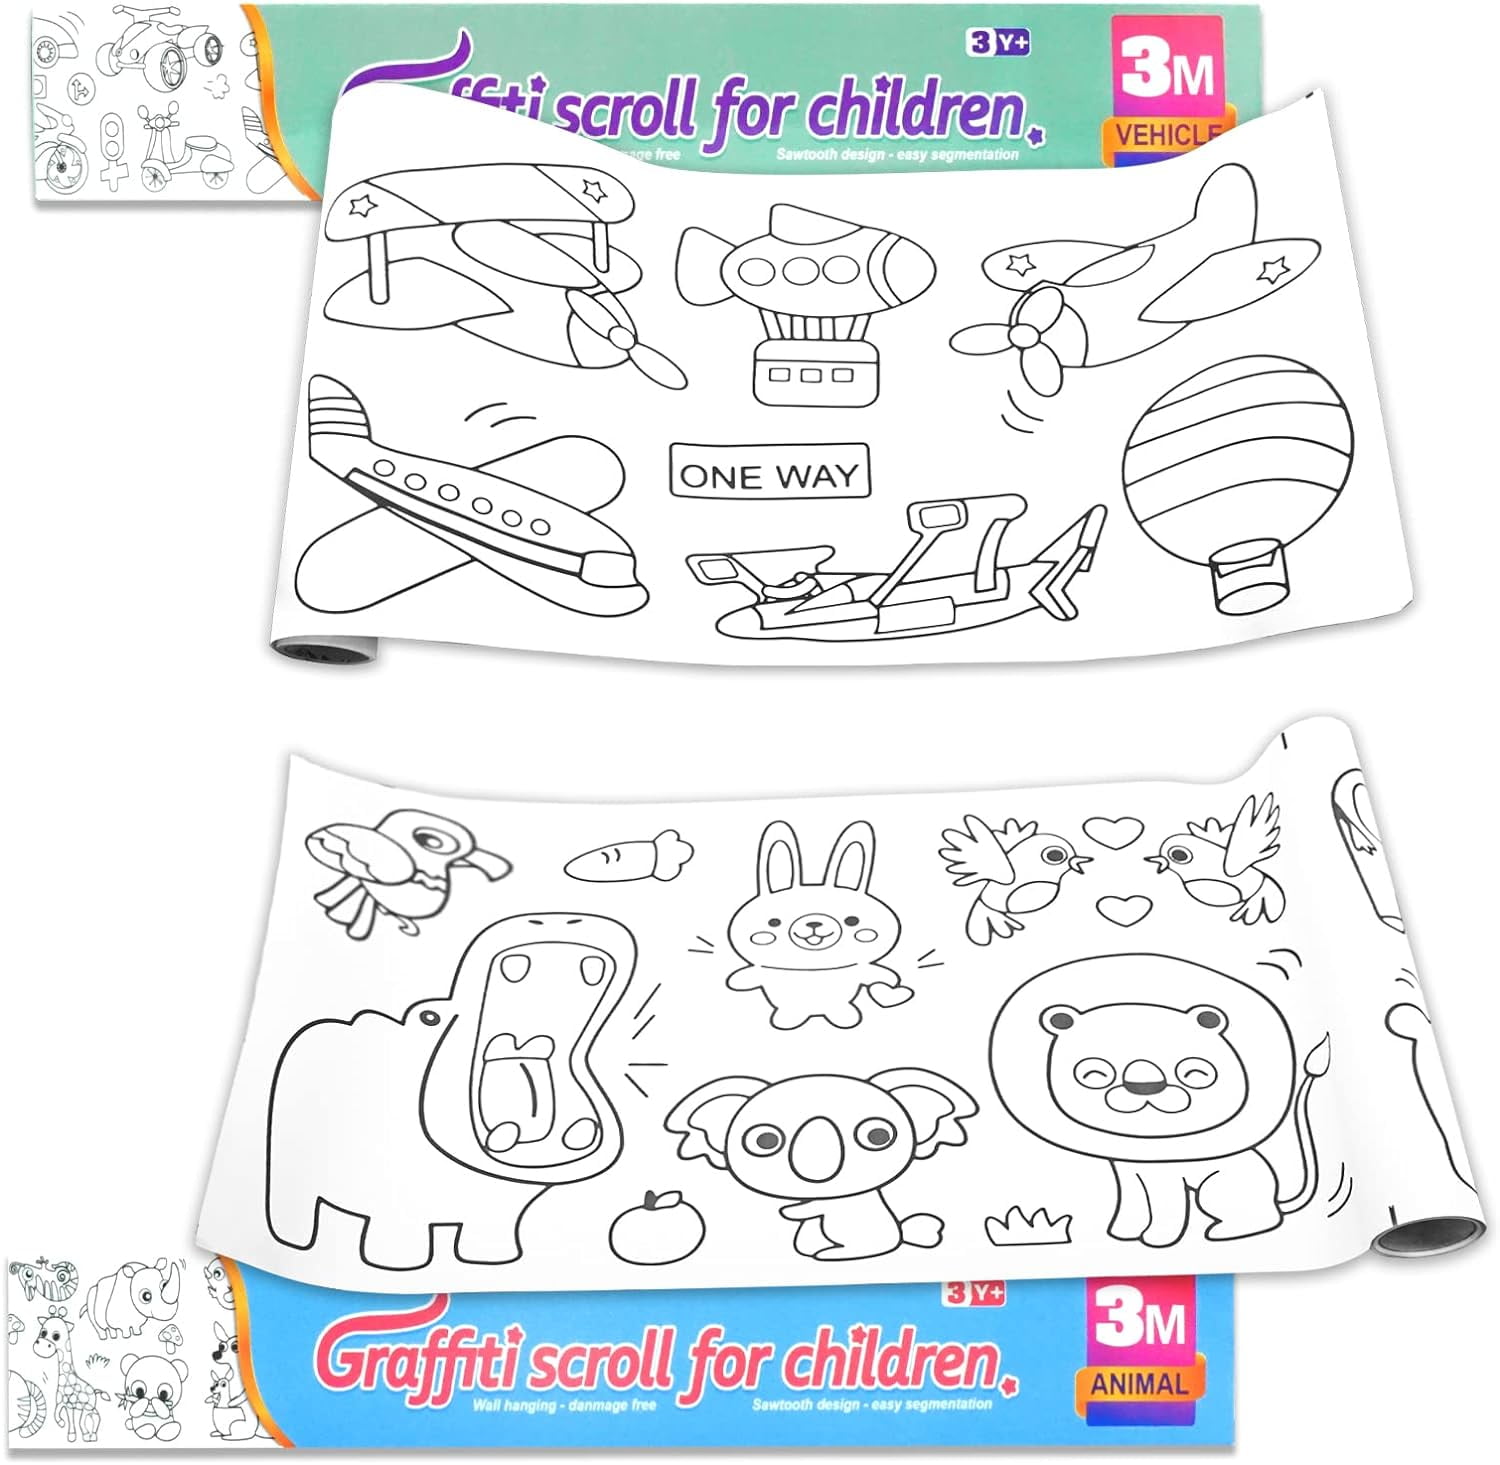 Reskid Drawing Paper Pad (12 x 18 inches) - 50 Sheets, 2-Pack Coloring Art  Pads for Kids, Sketch Kids (12x18) (12x18DRAWPAD)